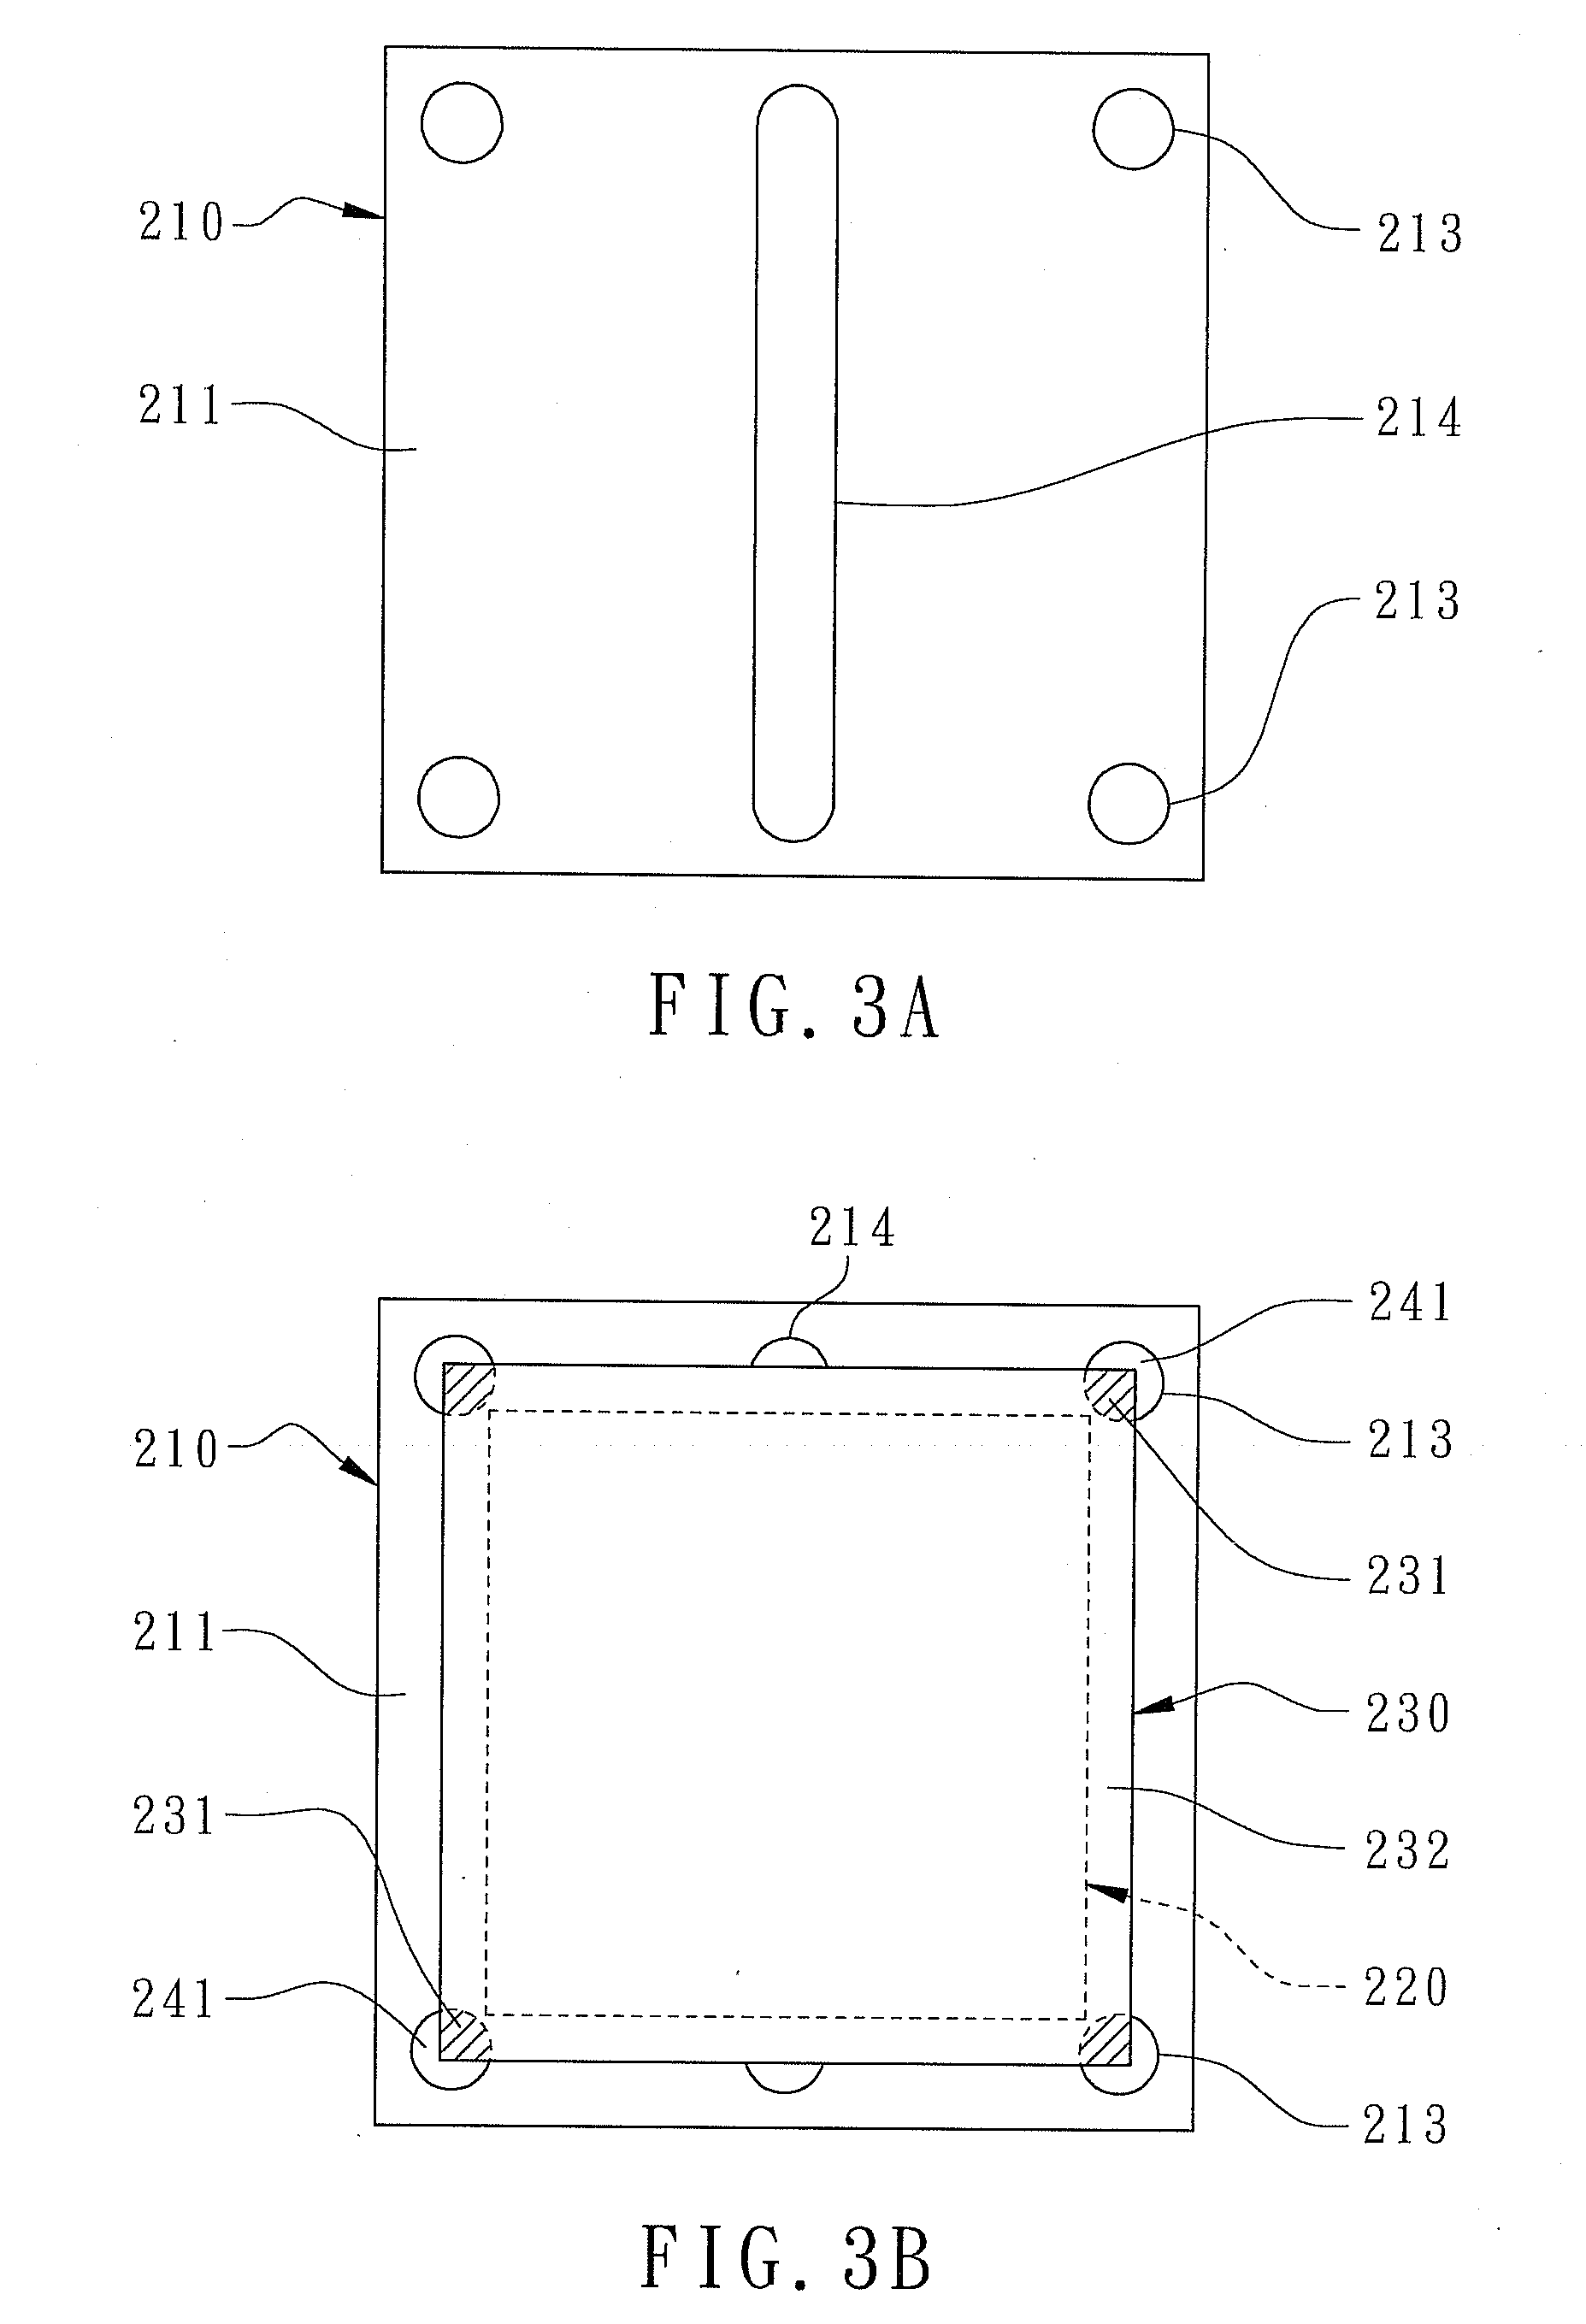 Thermally-enhanced multi-hole semiconductor package